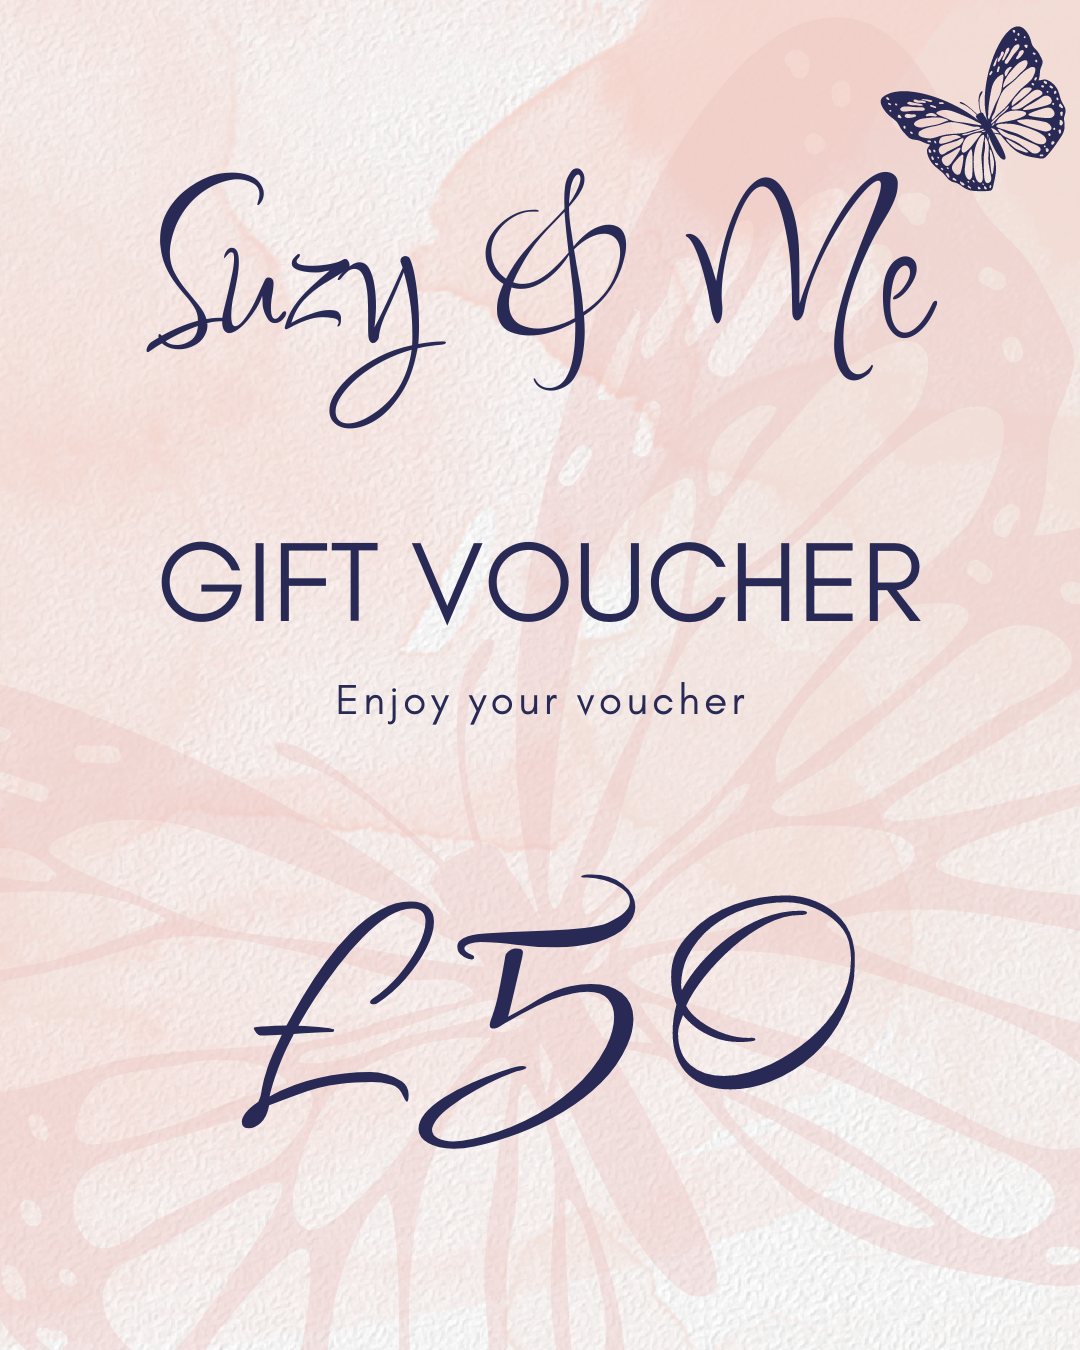 Suzy & Me Collection Gift Voucher £25